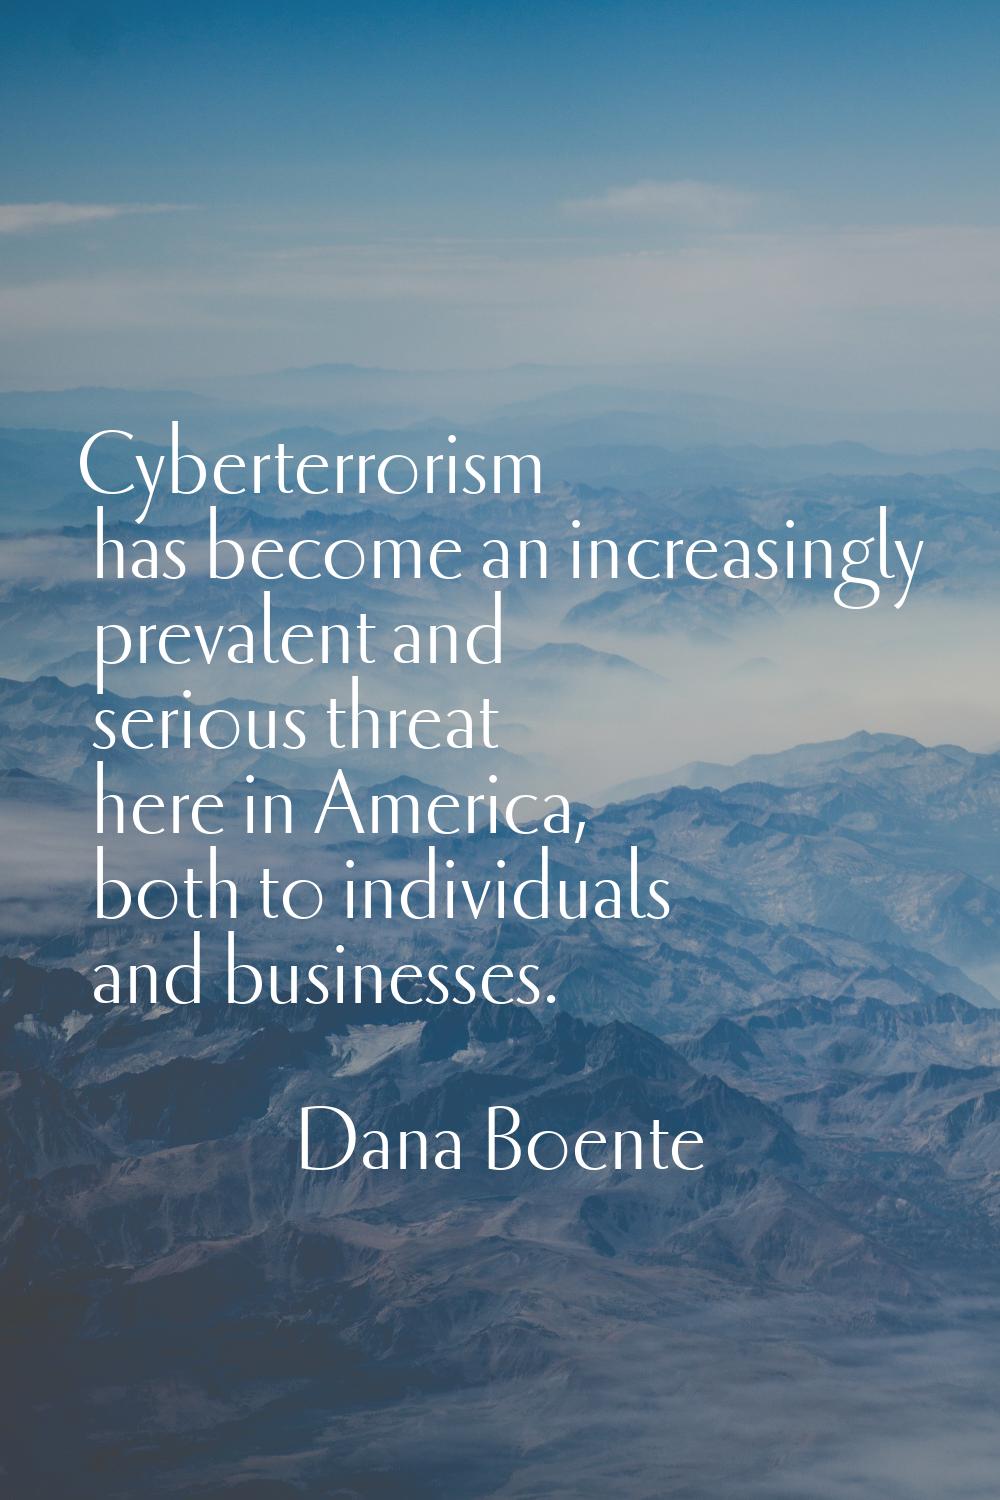 Cyberterrorism has become an increasingly prevalent and serious threat here in America, both to ind